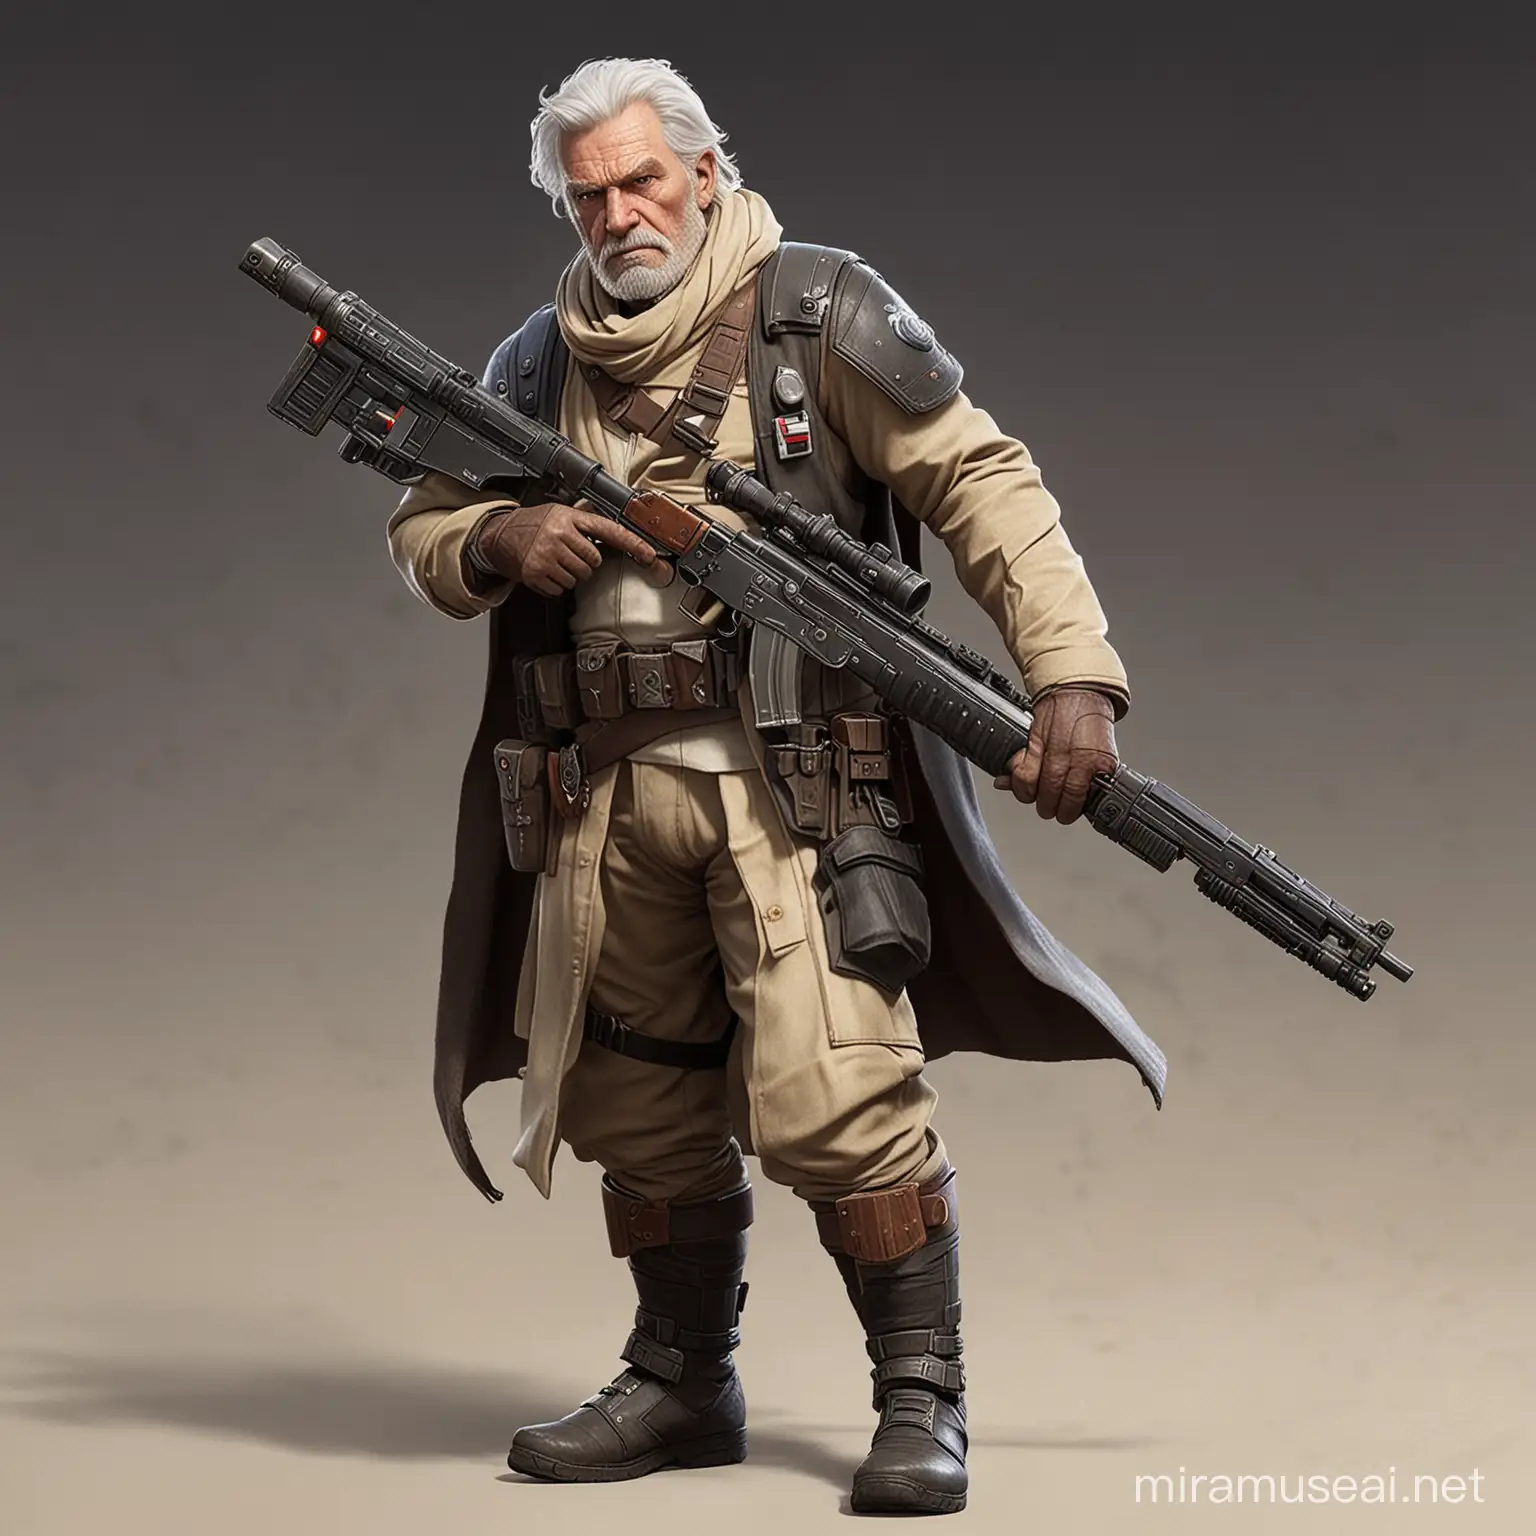 Grizzled Star Wars Mercenary with a Rebel Spirit